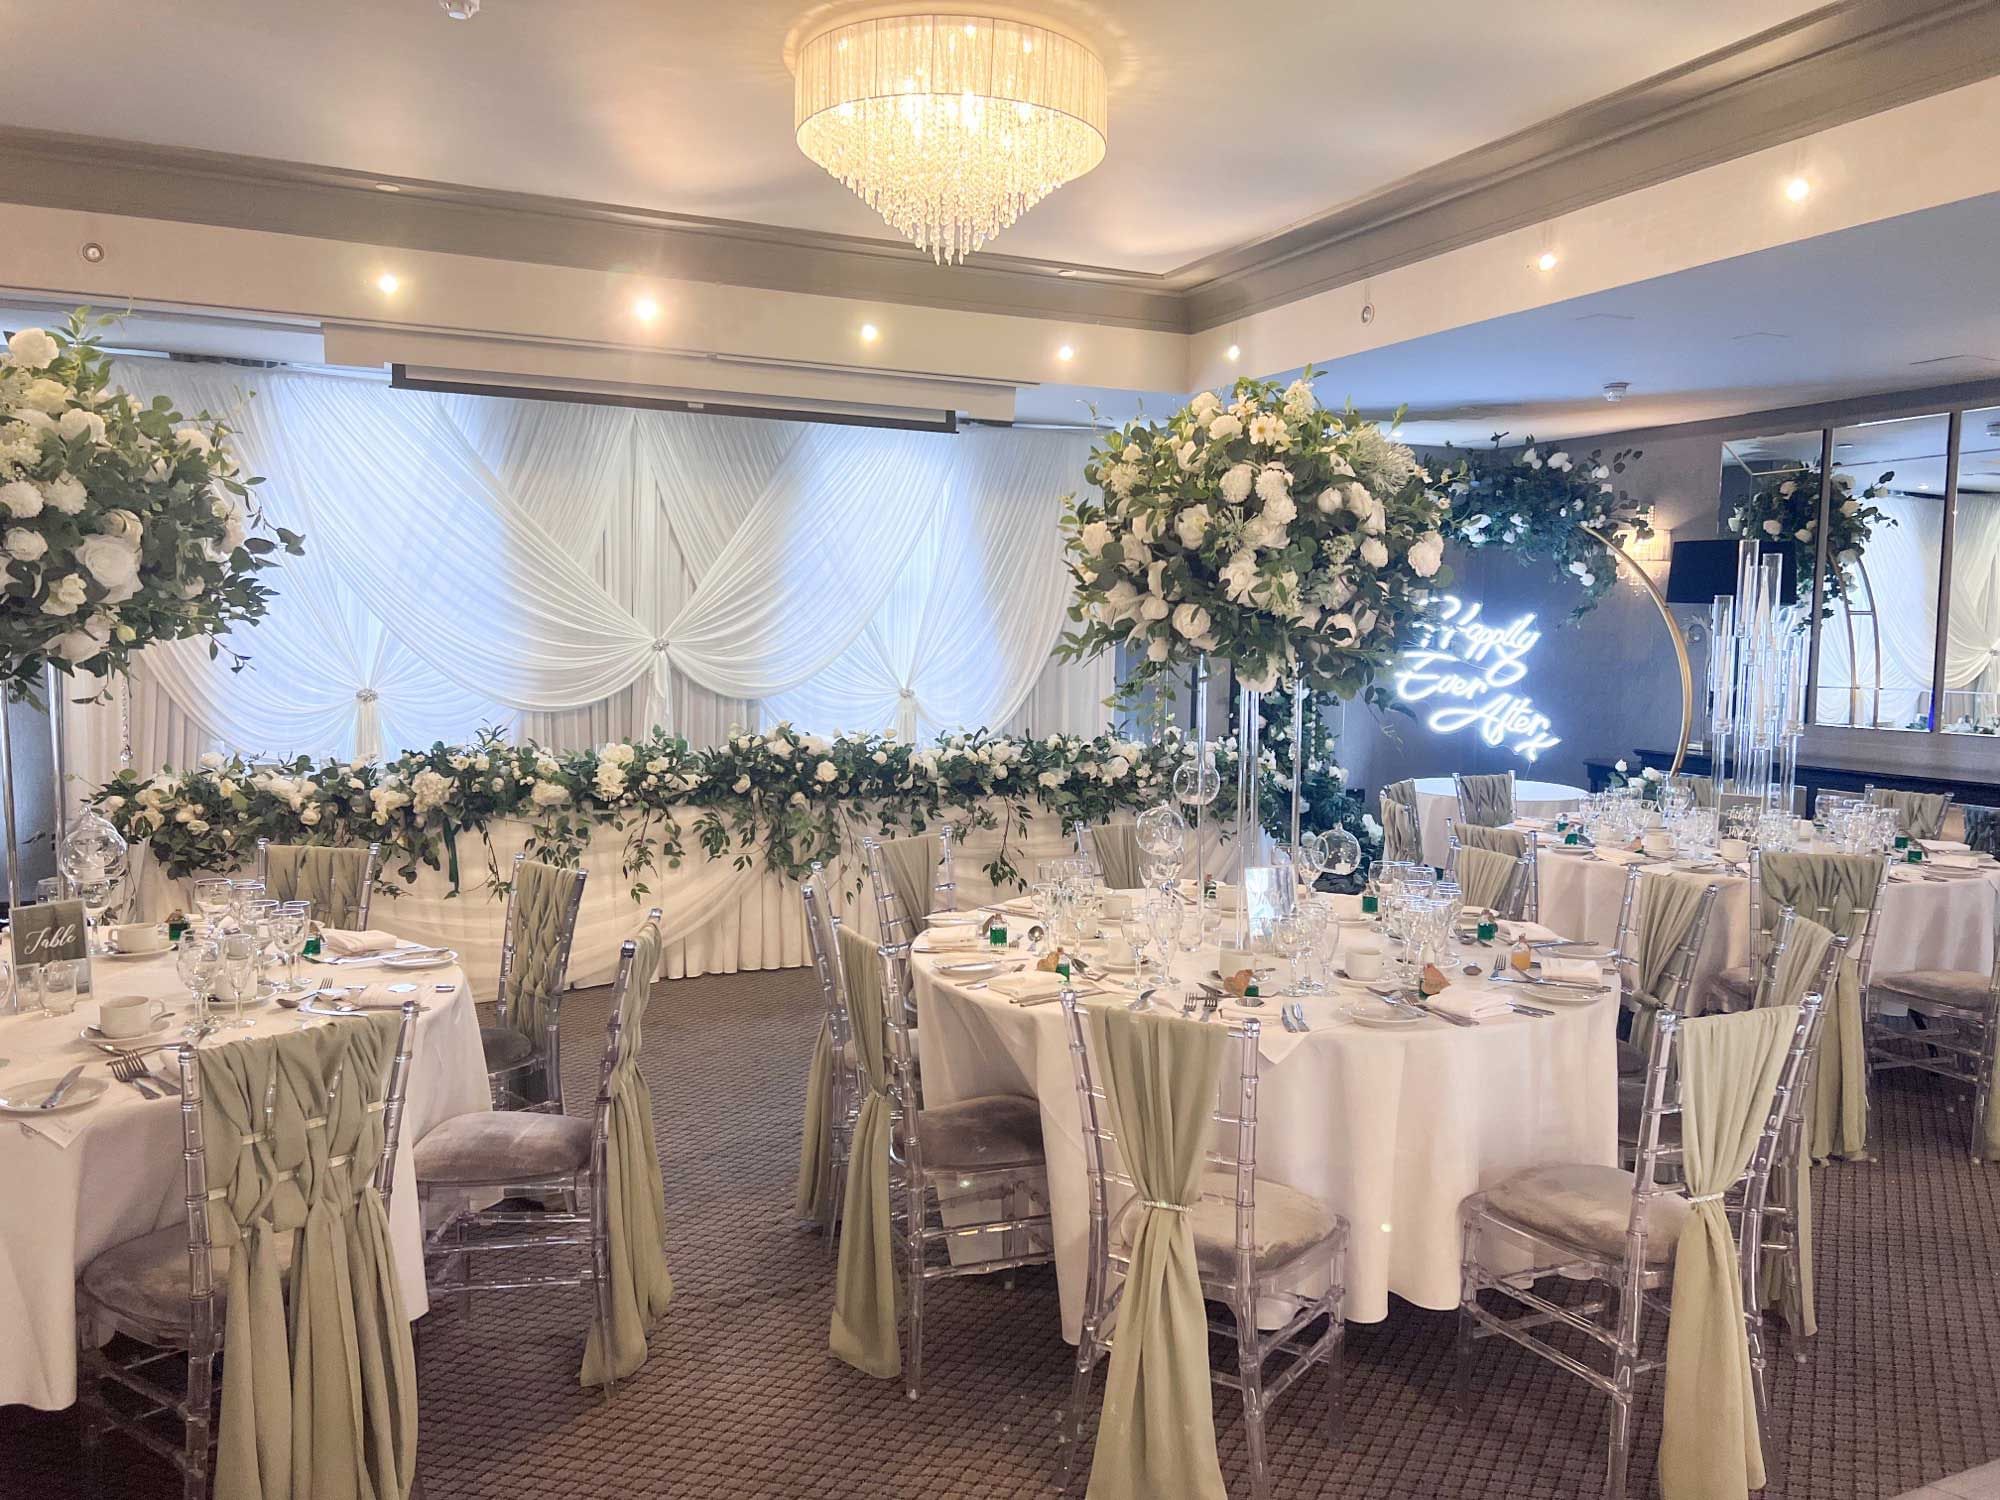 Whitmore Suite of a wedding venue at Orsett Hall Hotel